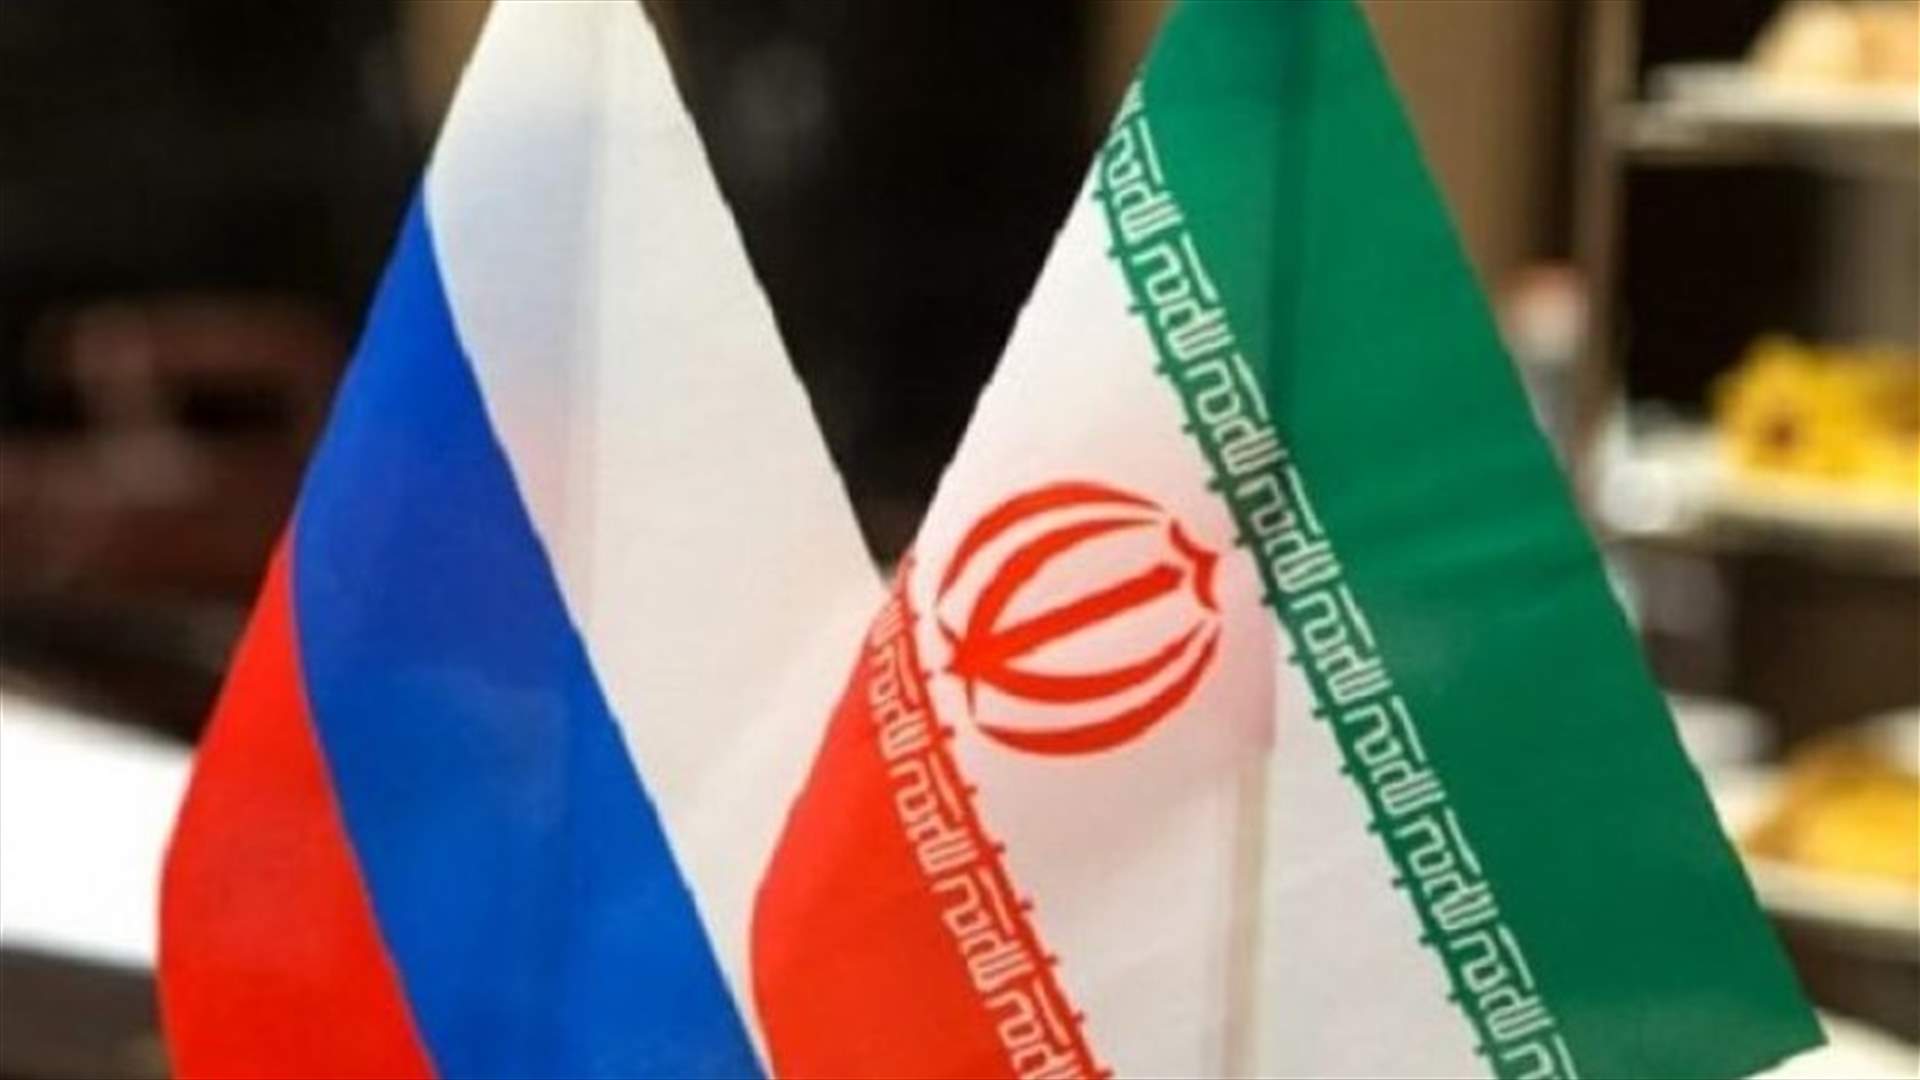 Iran and Russia want to boost energy and trade cooperation